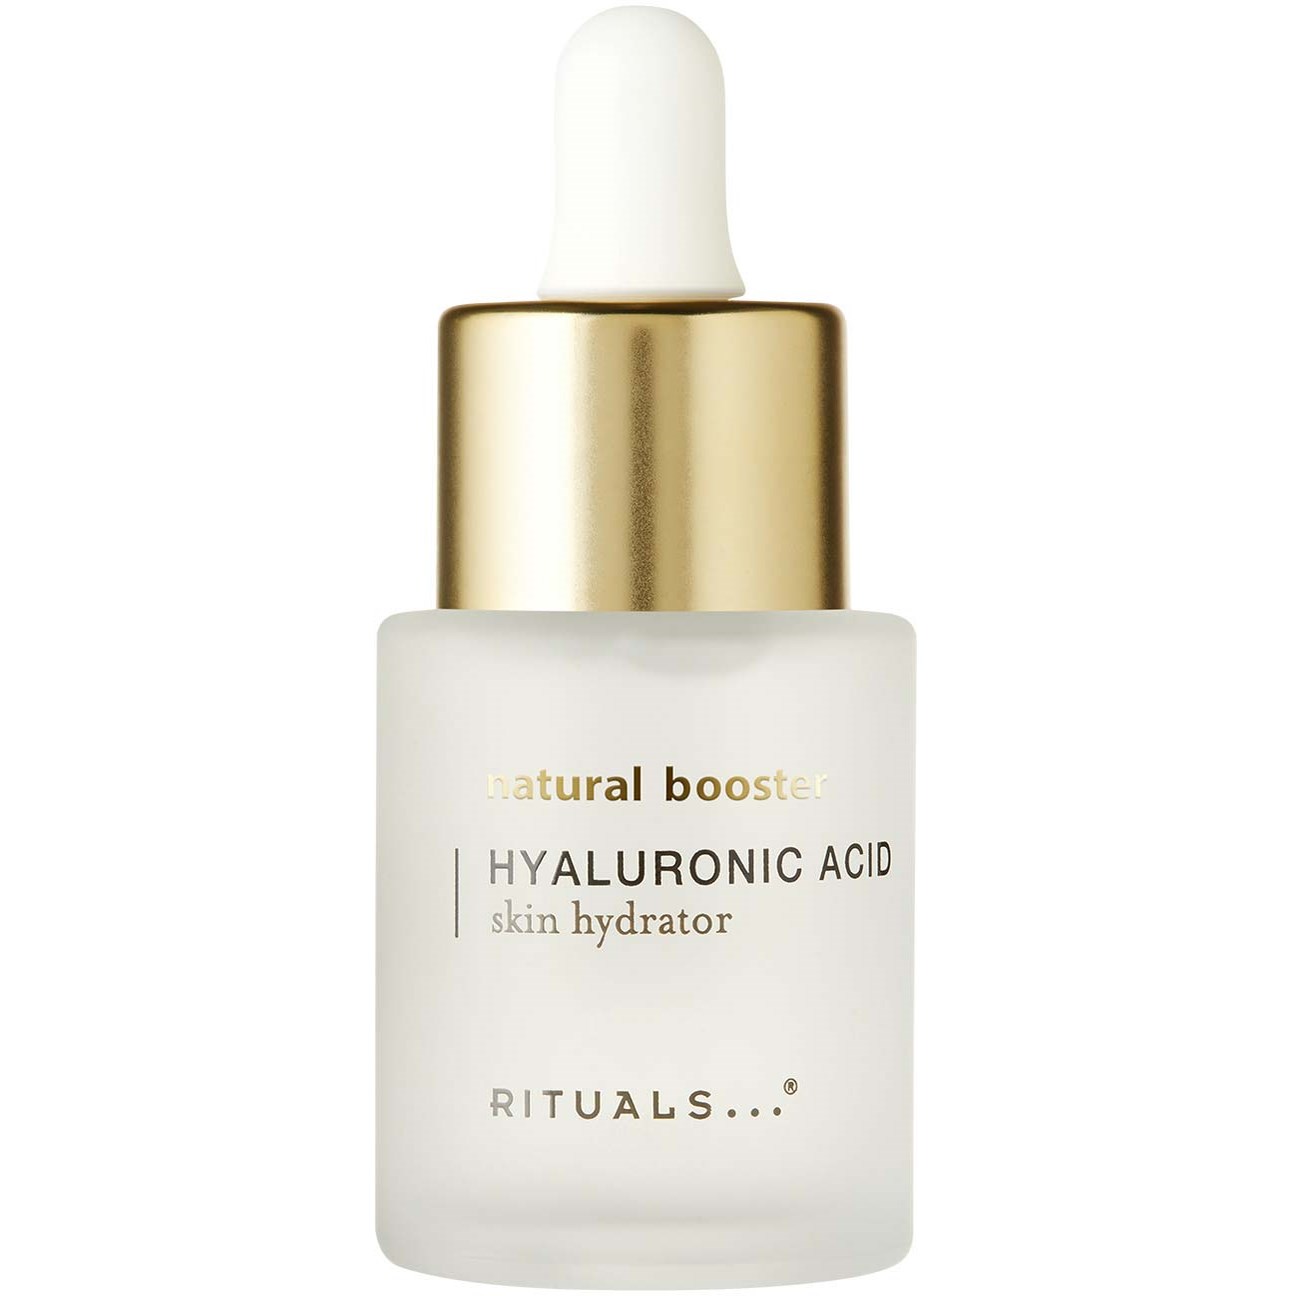 Rituals The Ritual of Namaste Hyaluronic Acid Natural Booster 20 ml